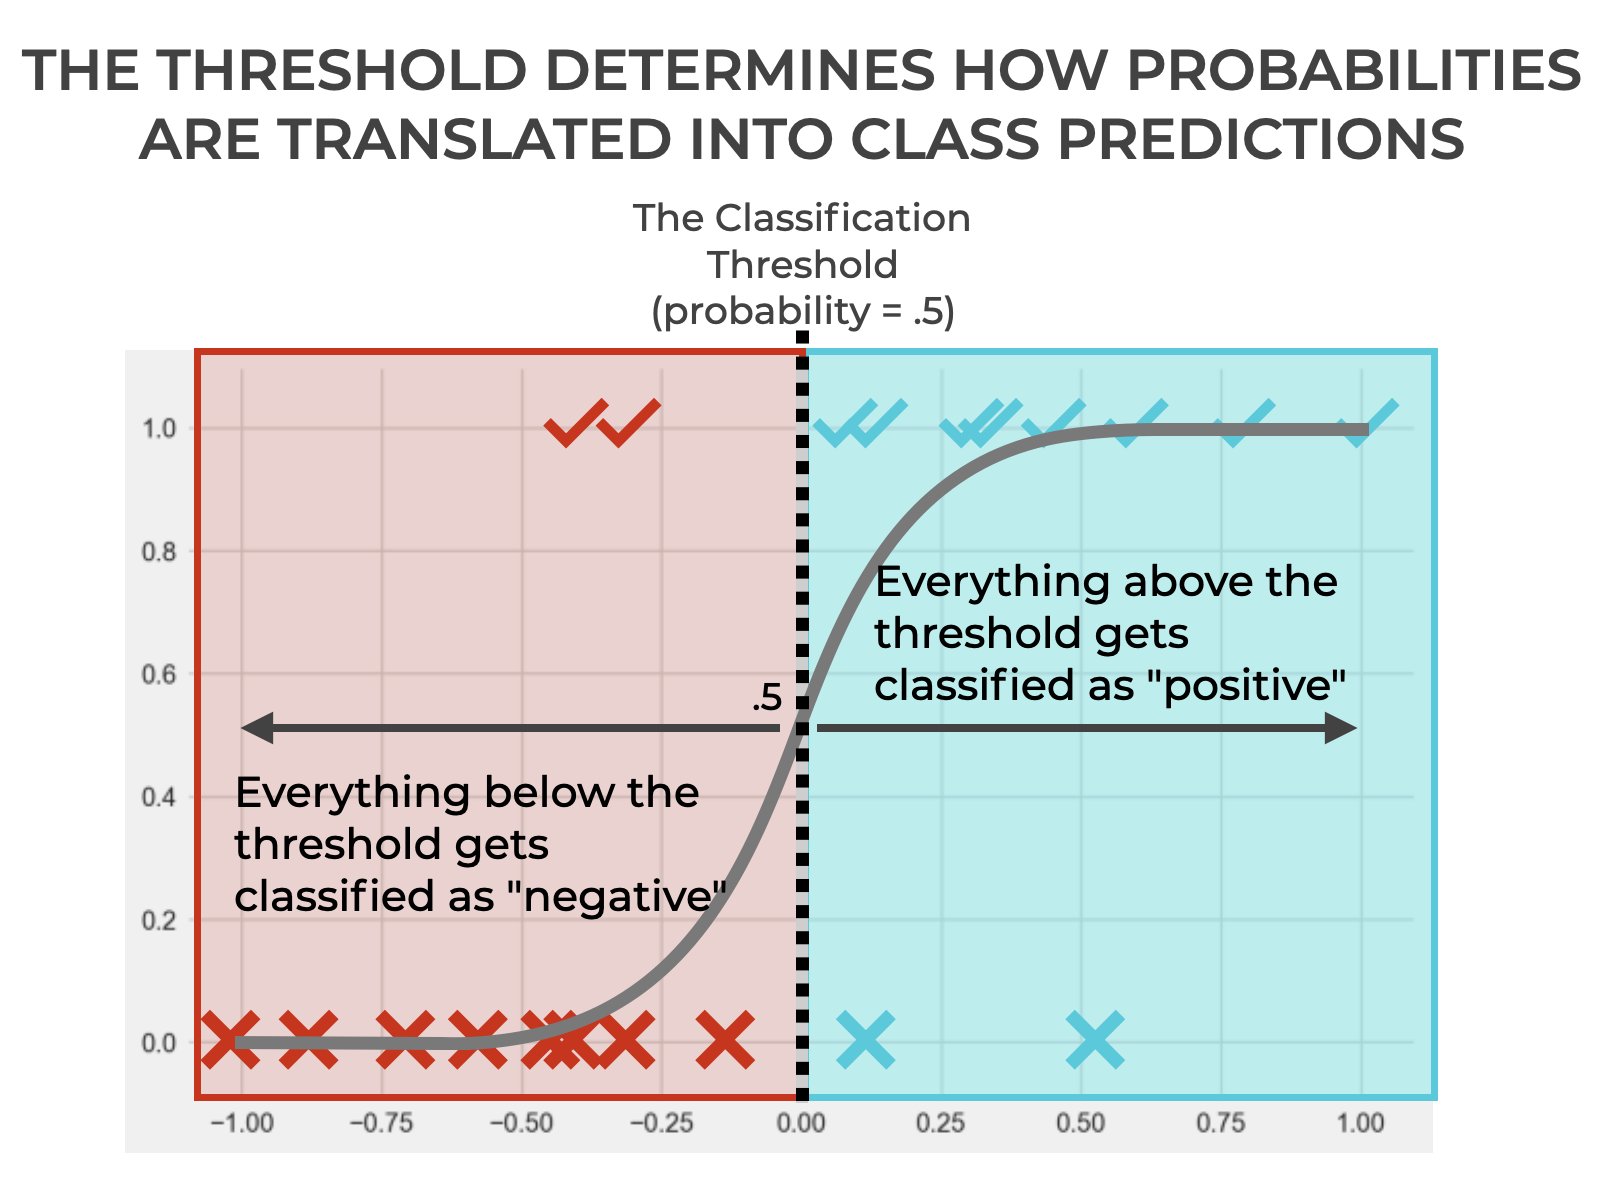 An image that shows how the threshold translates probability score into class prediction.